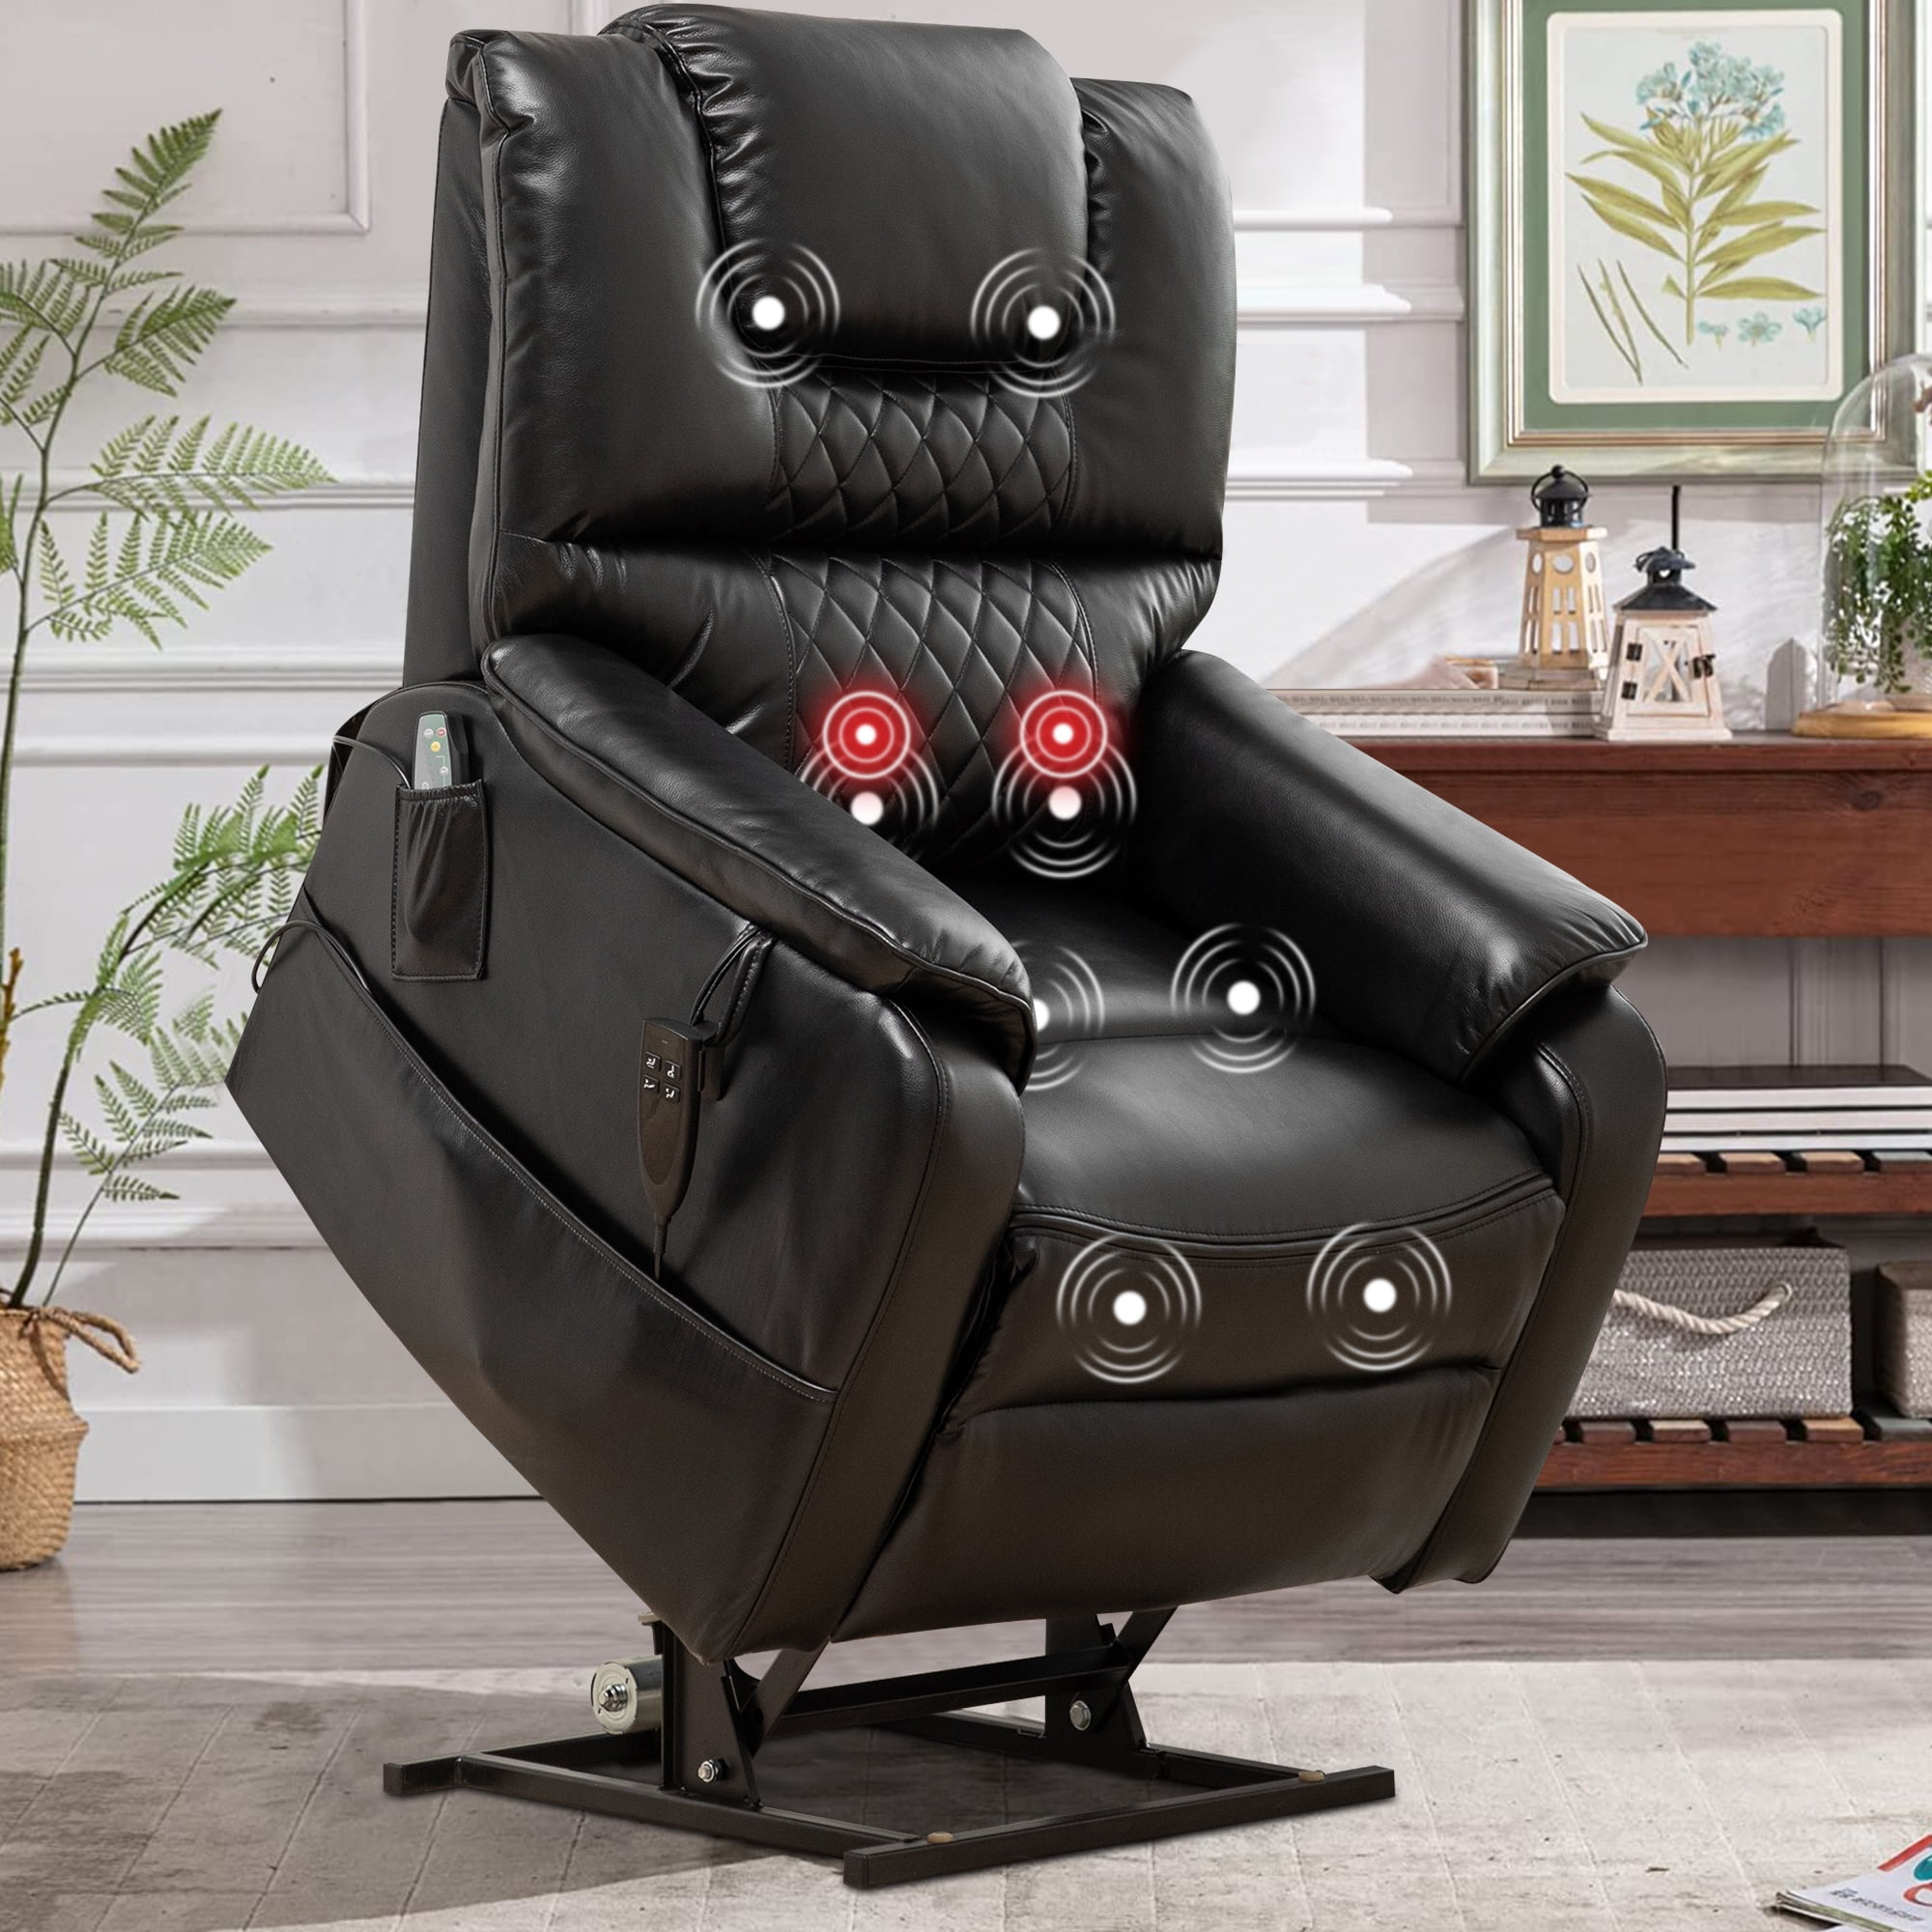 Uhomepro Large Electric Massage Recliner with Heat, Velvet Lift Recliner Chair for Elderly Oversize, Living Room Chaise Lounge w/ 5 Vibration Modes